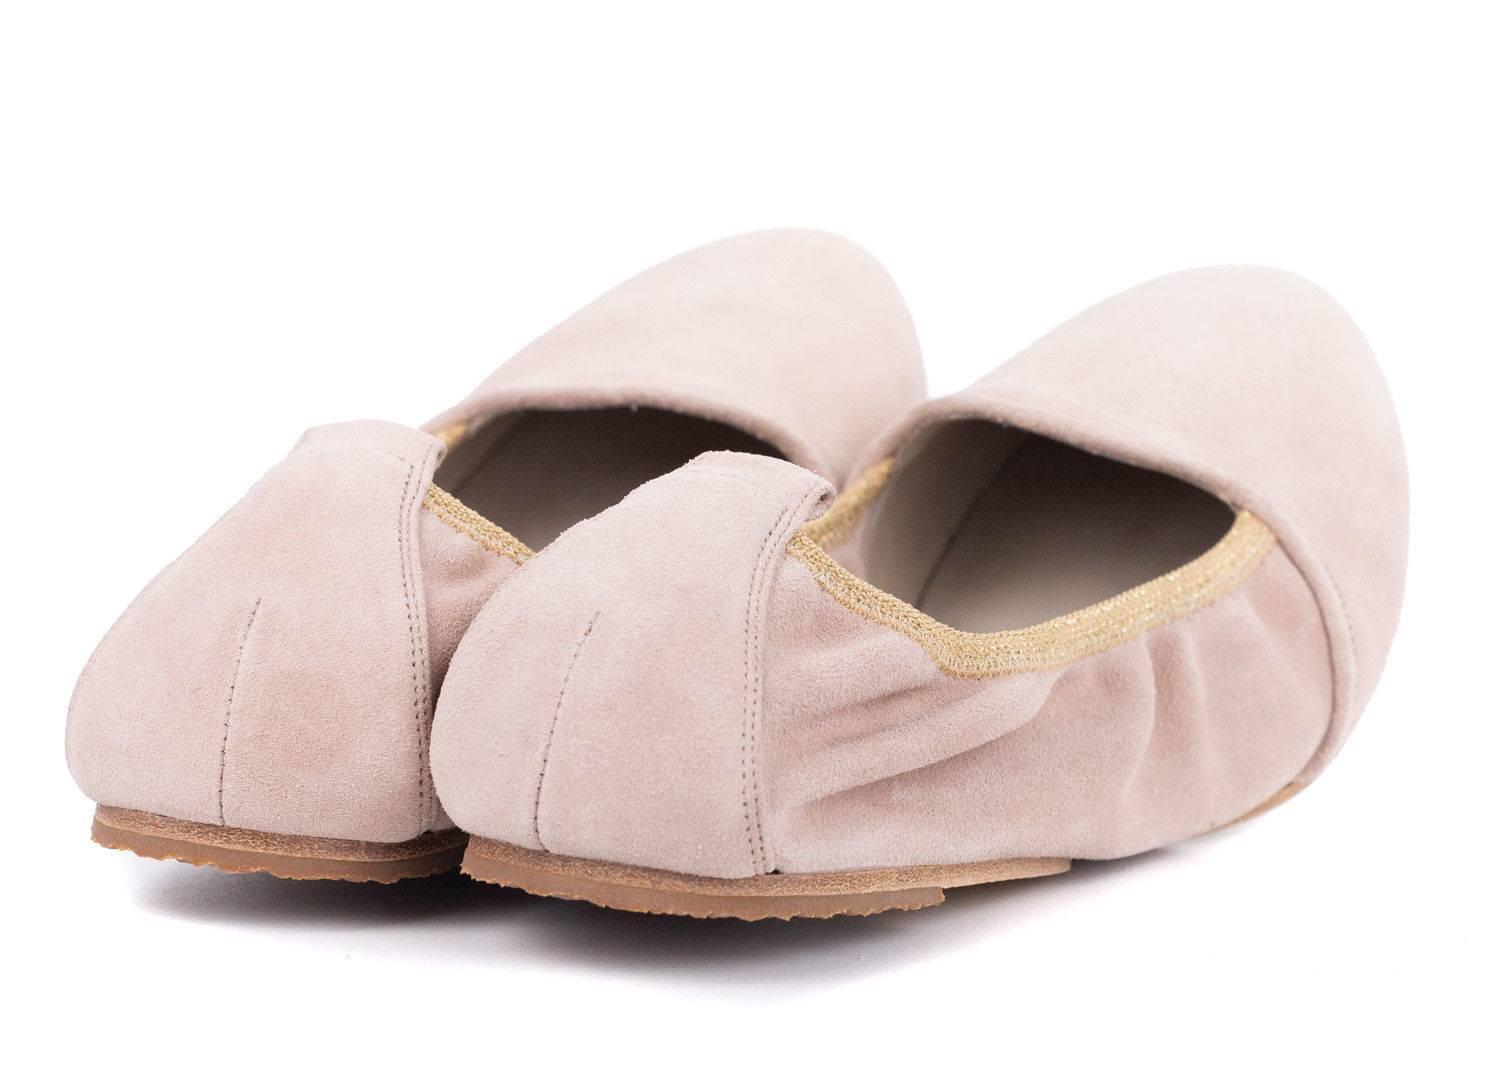 Original box and Dust Bag Included

Retail in Stores and Online $695

Size Euro 38 US 8 Fits True To Size

Brunello Cucinelli's light mauve ballet flats are every woman's spicy essential. These flats feature a richly smooth suede panel, gold lurex